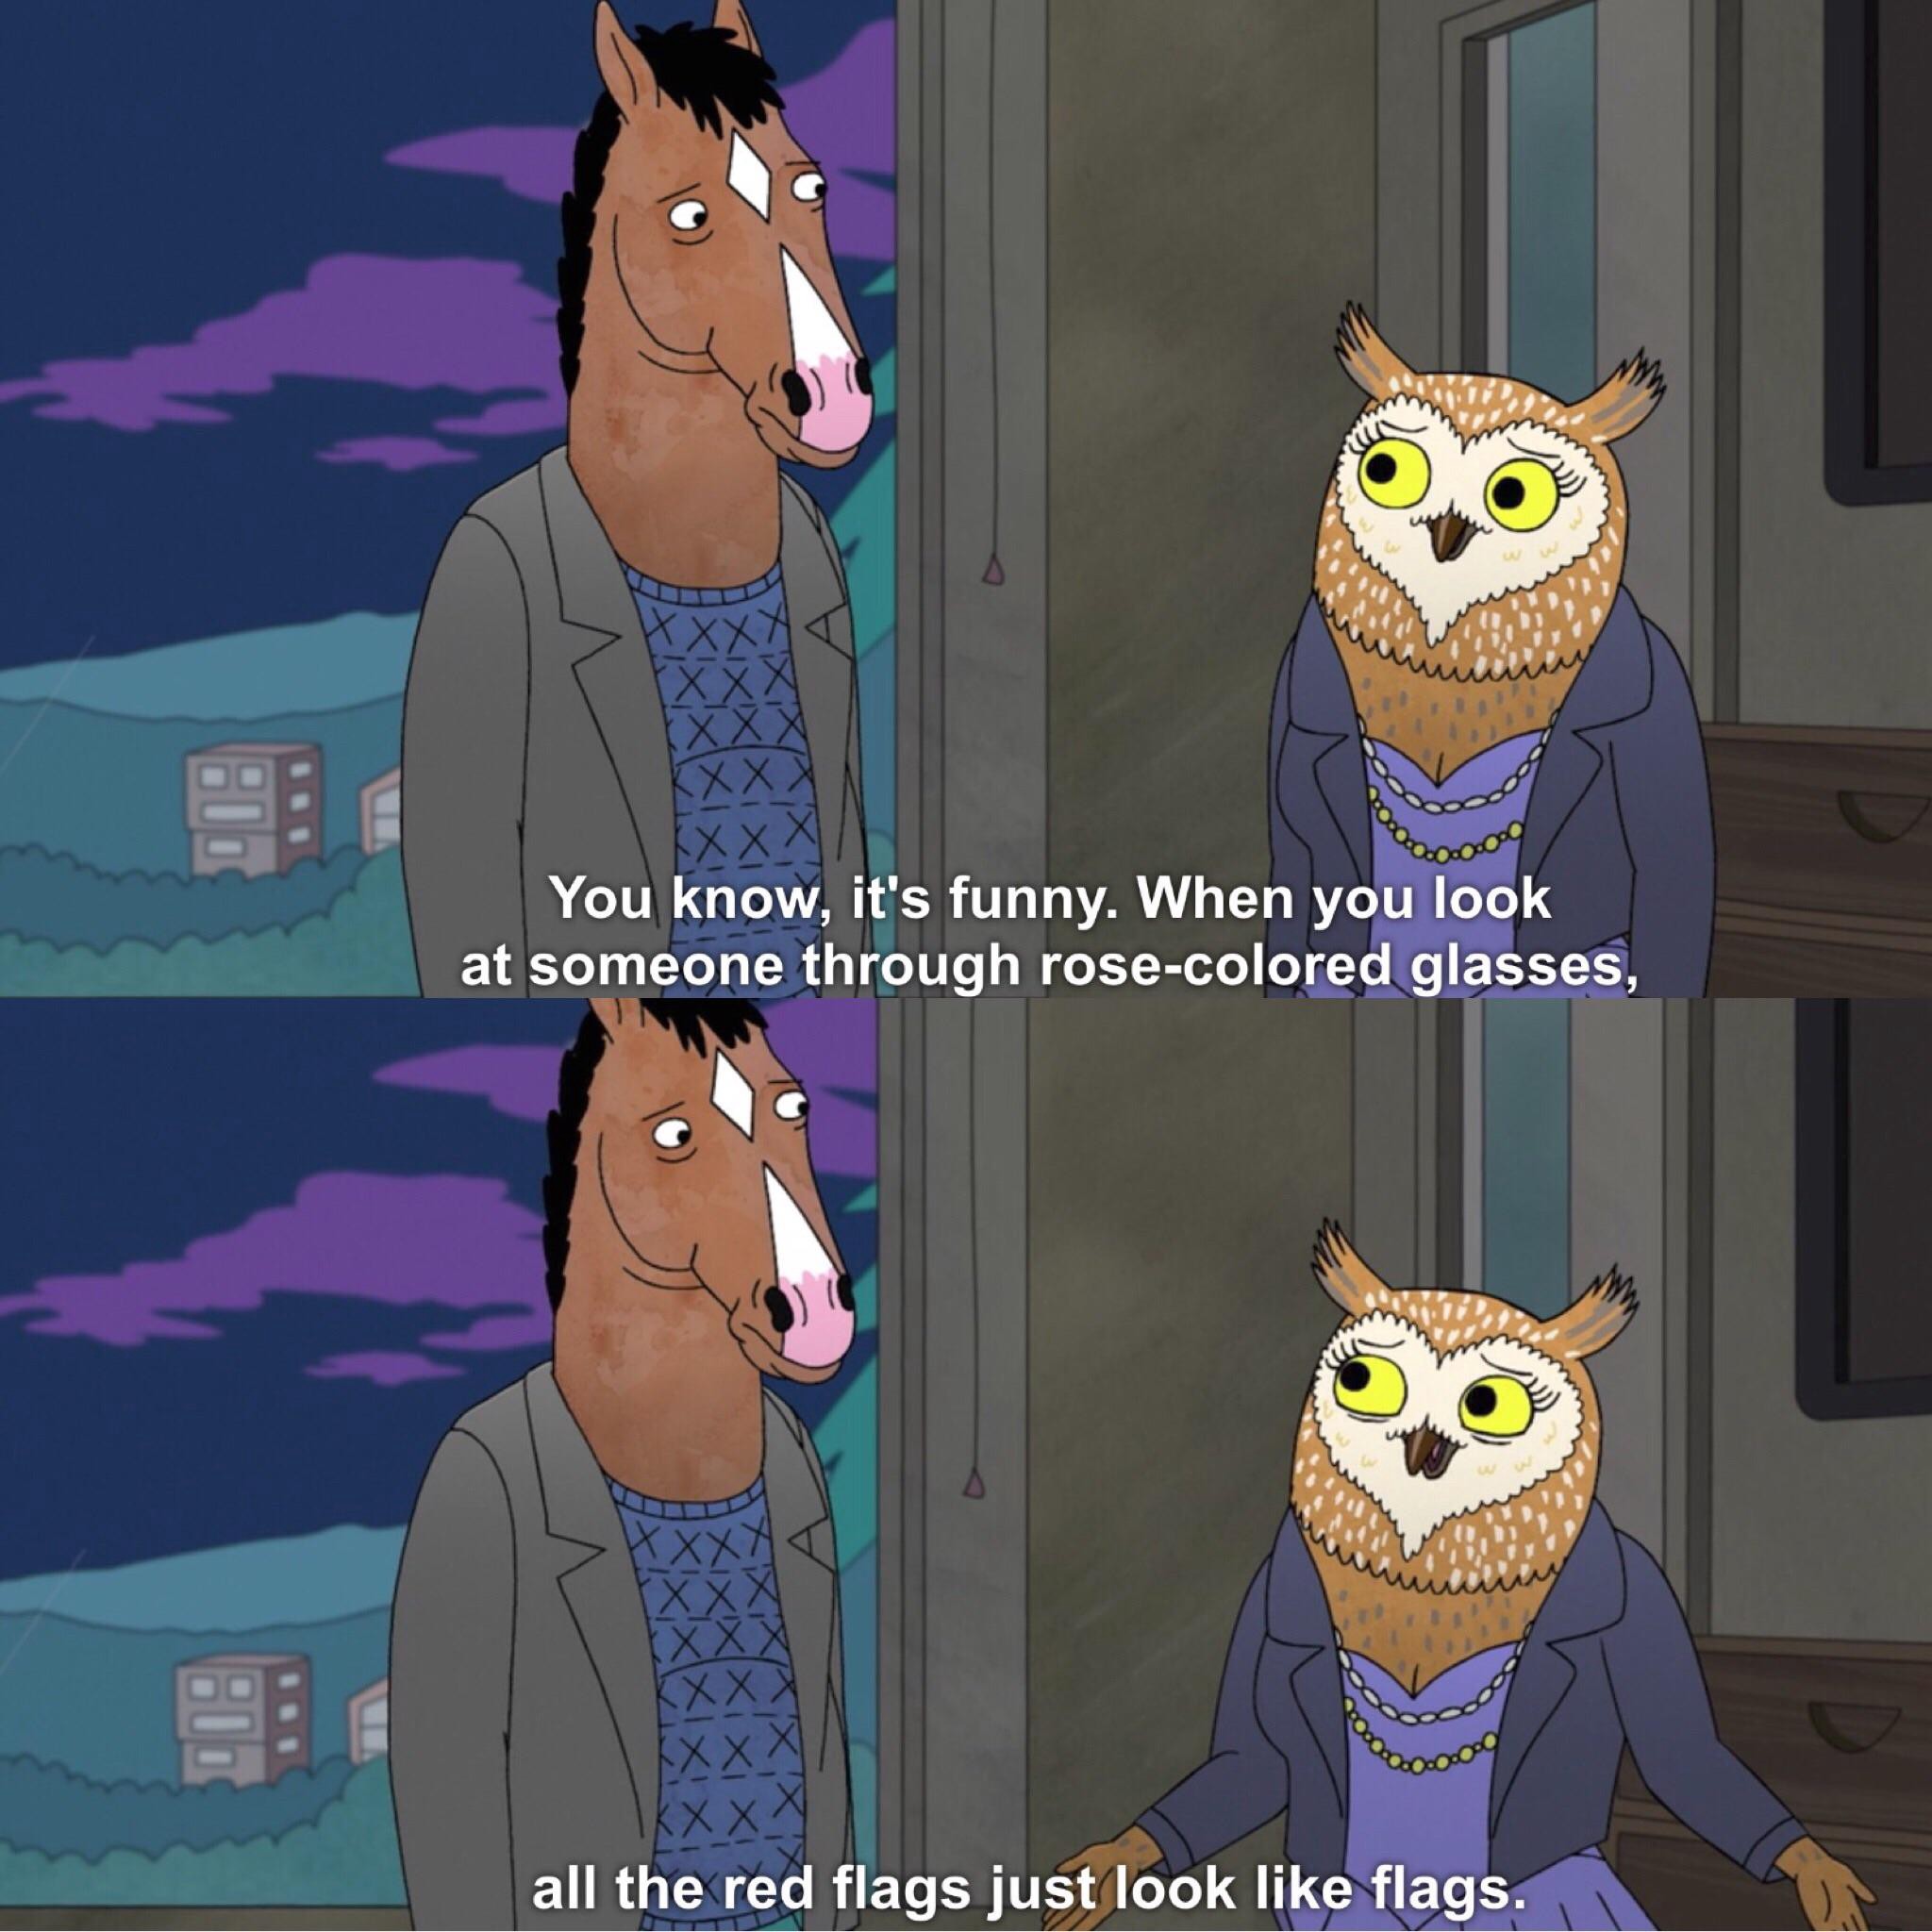 A screencap of the scene from Bojack Horseman where Wanda the owl says the line with the rose-colored glasses and red flags.